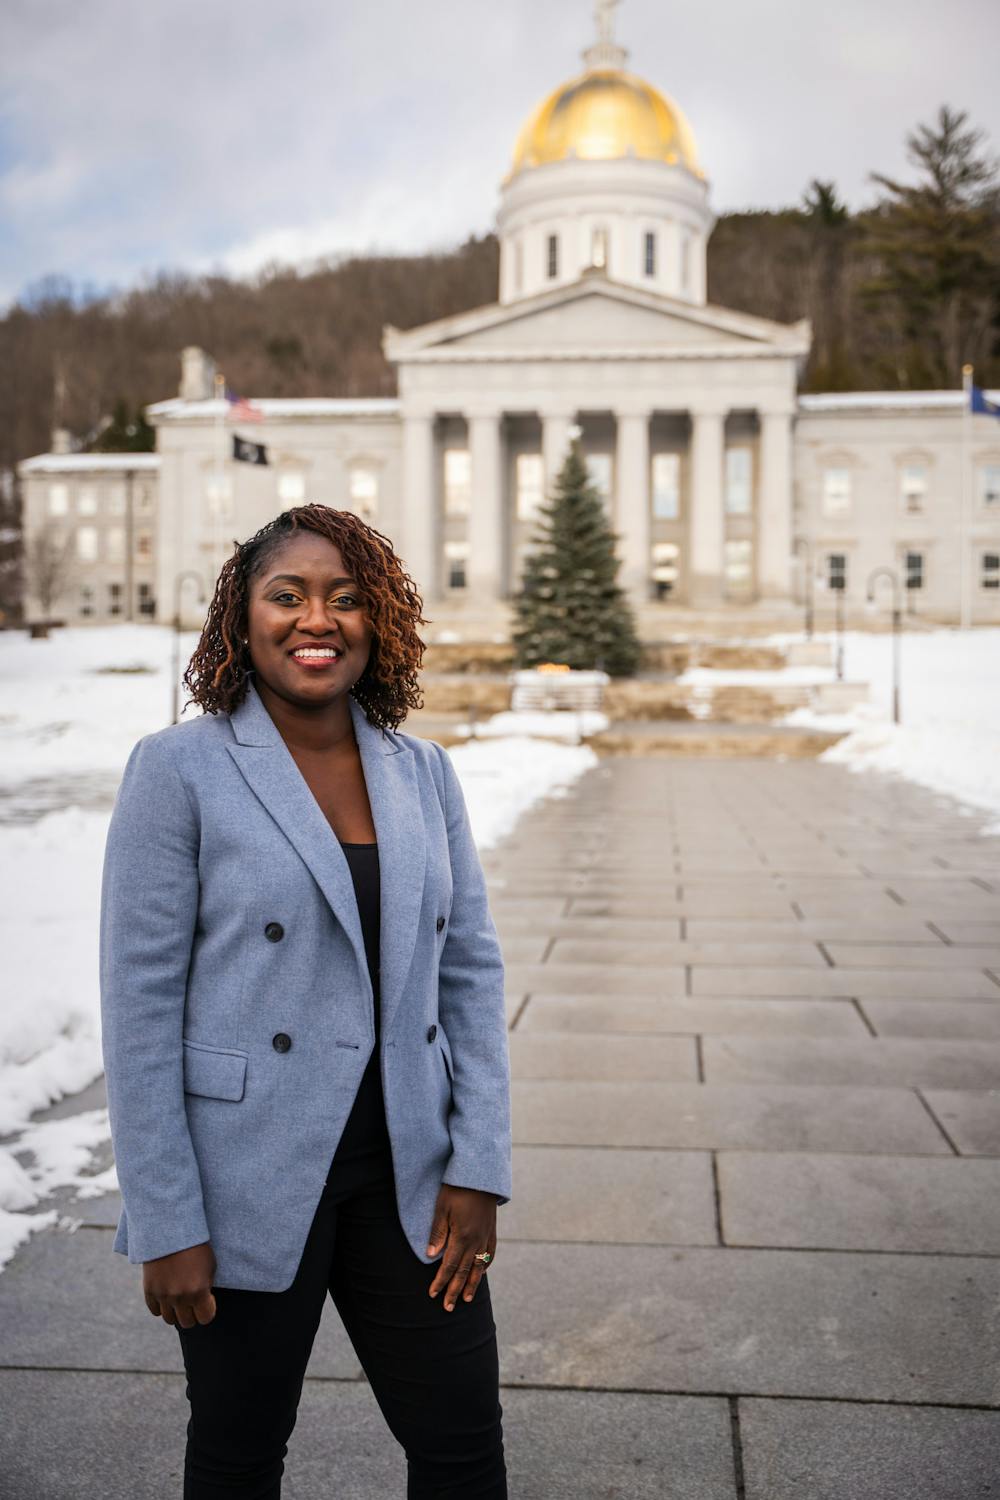 Charlestin came to Vermont in 2019 to work for the college as a residential director. She loved the position as she was able to interact with and support students on a daily basis as they navigated their time at Middlebury.